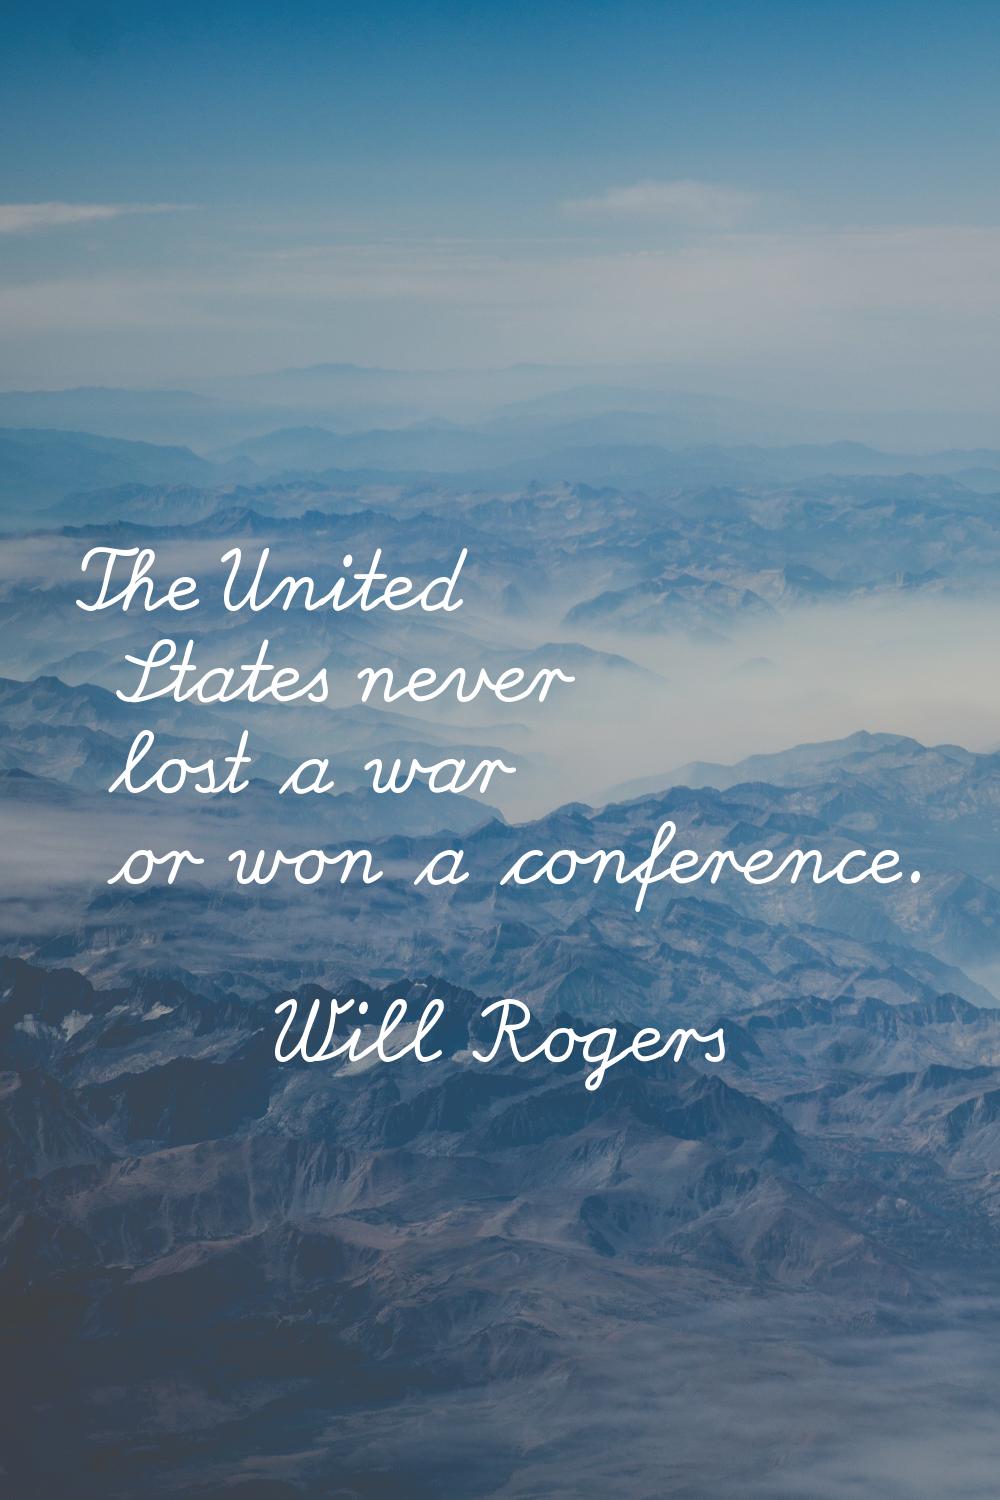 The United States never lost a war or won a conference.